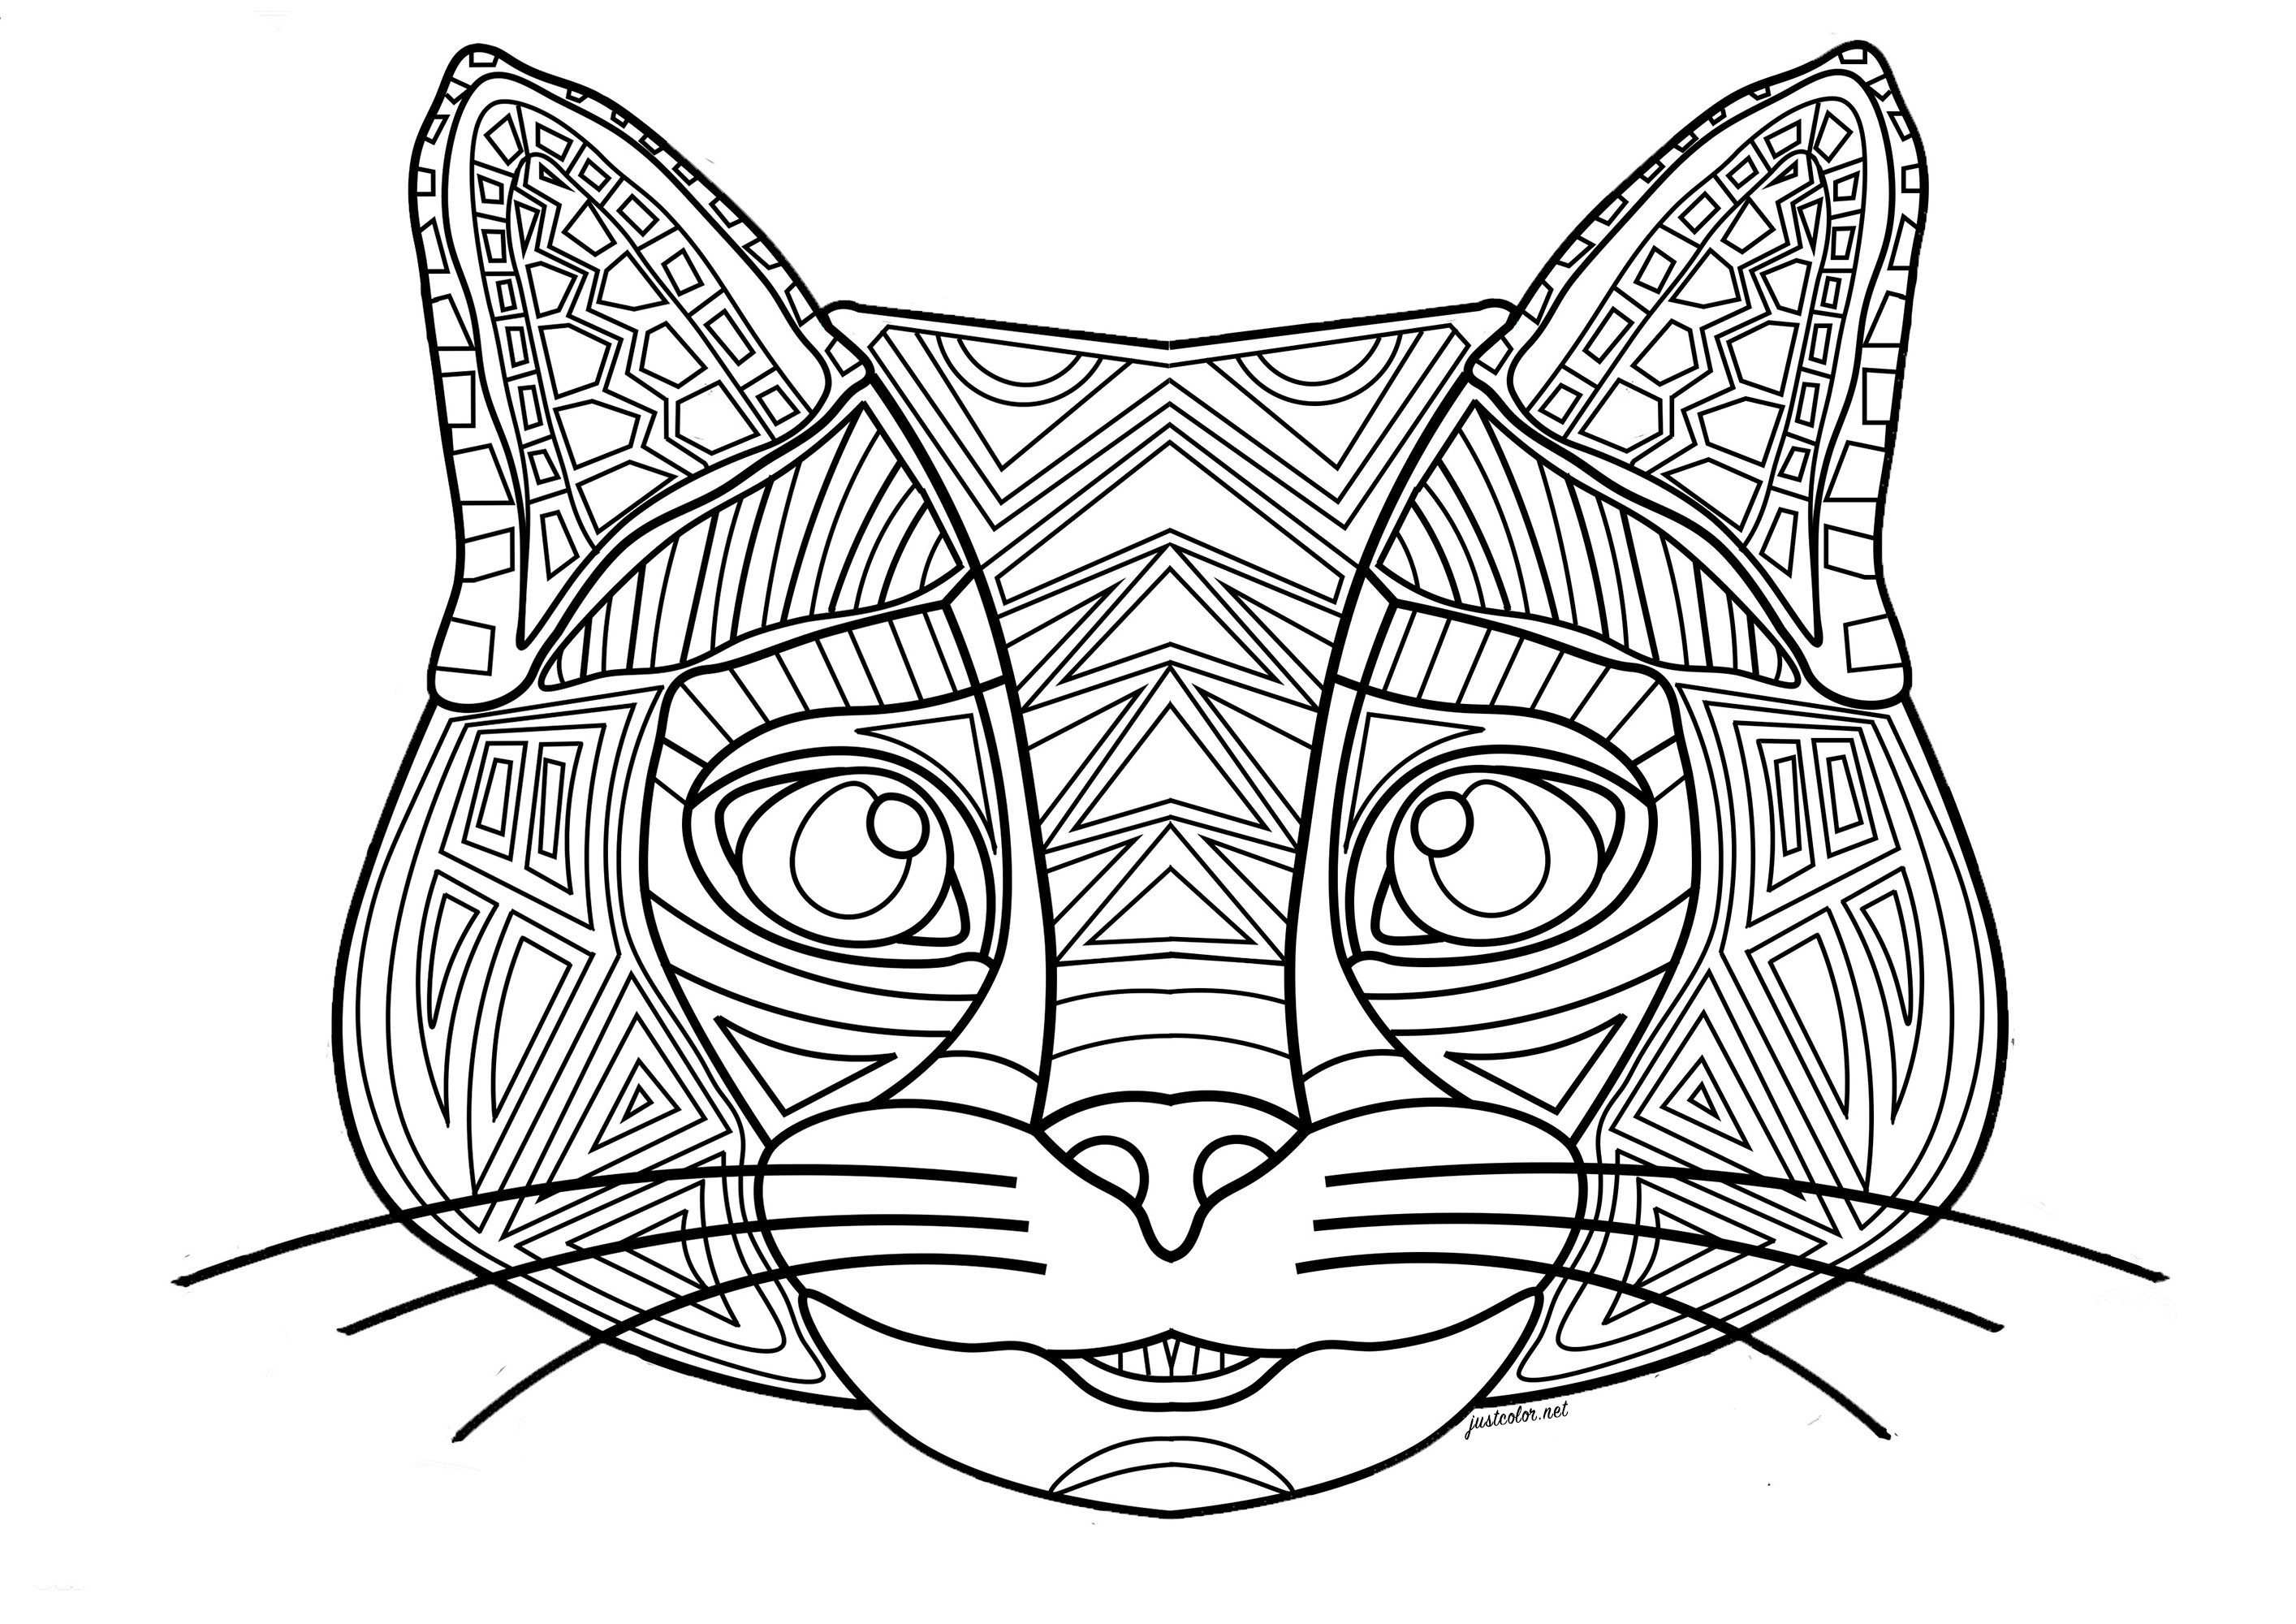 Cat head with floral background.  The head is formed from regular lines and geometric shapes.